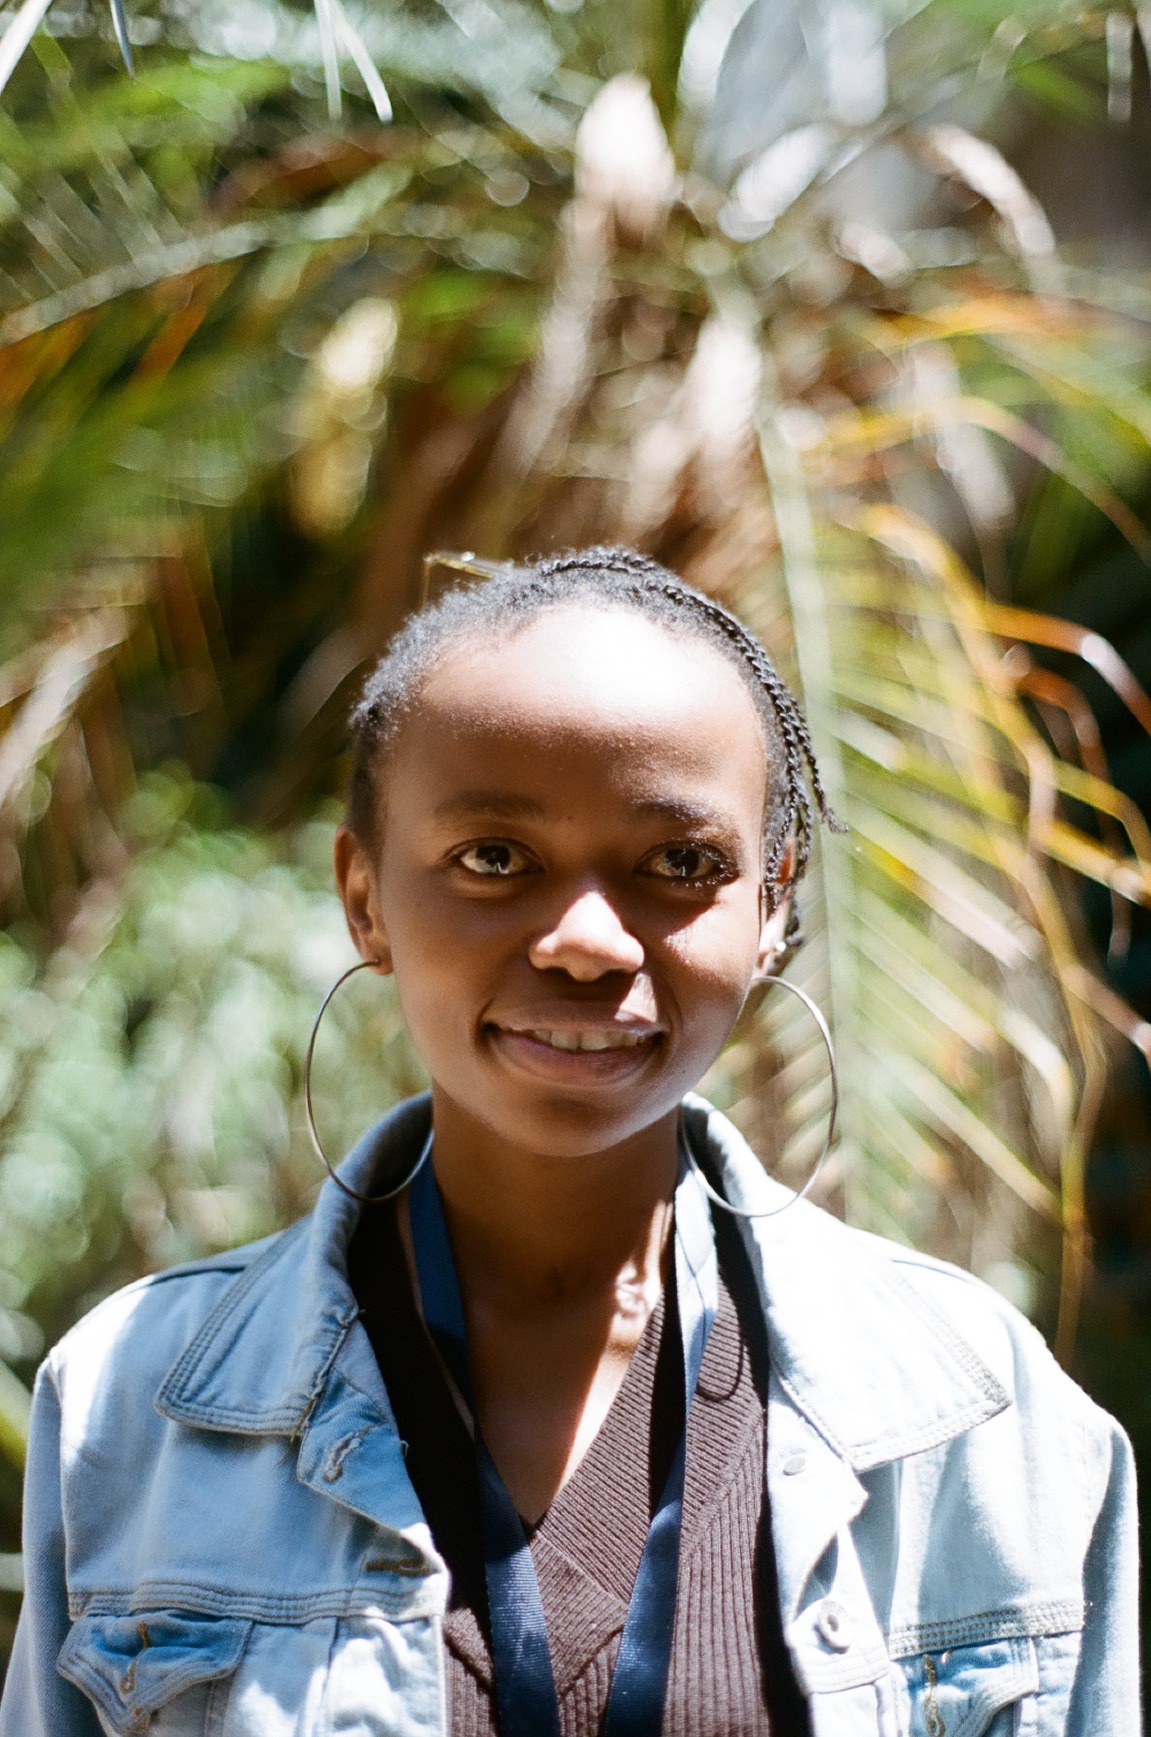 Photo portrait of young African woman smiling with short braids, big hoop earings and a jean jacket.